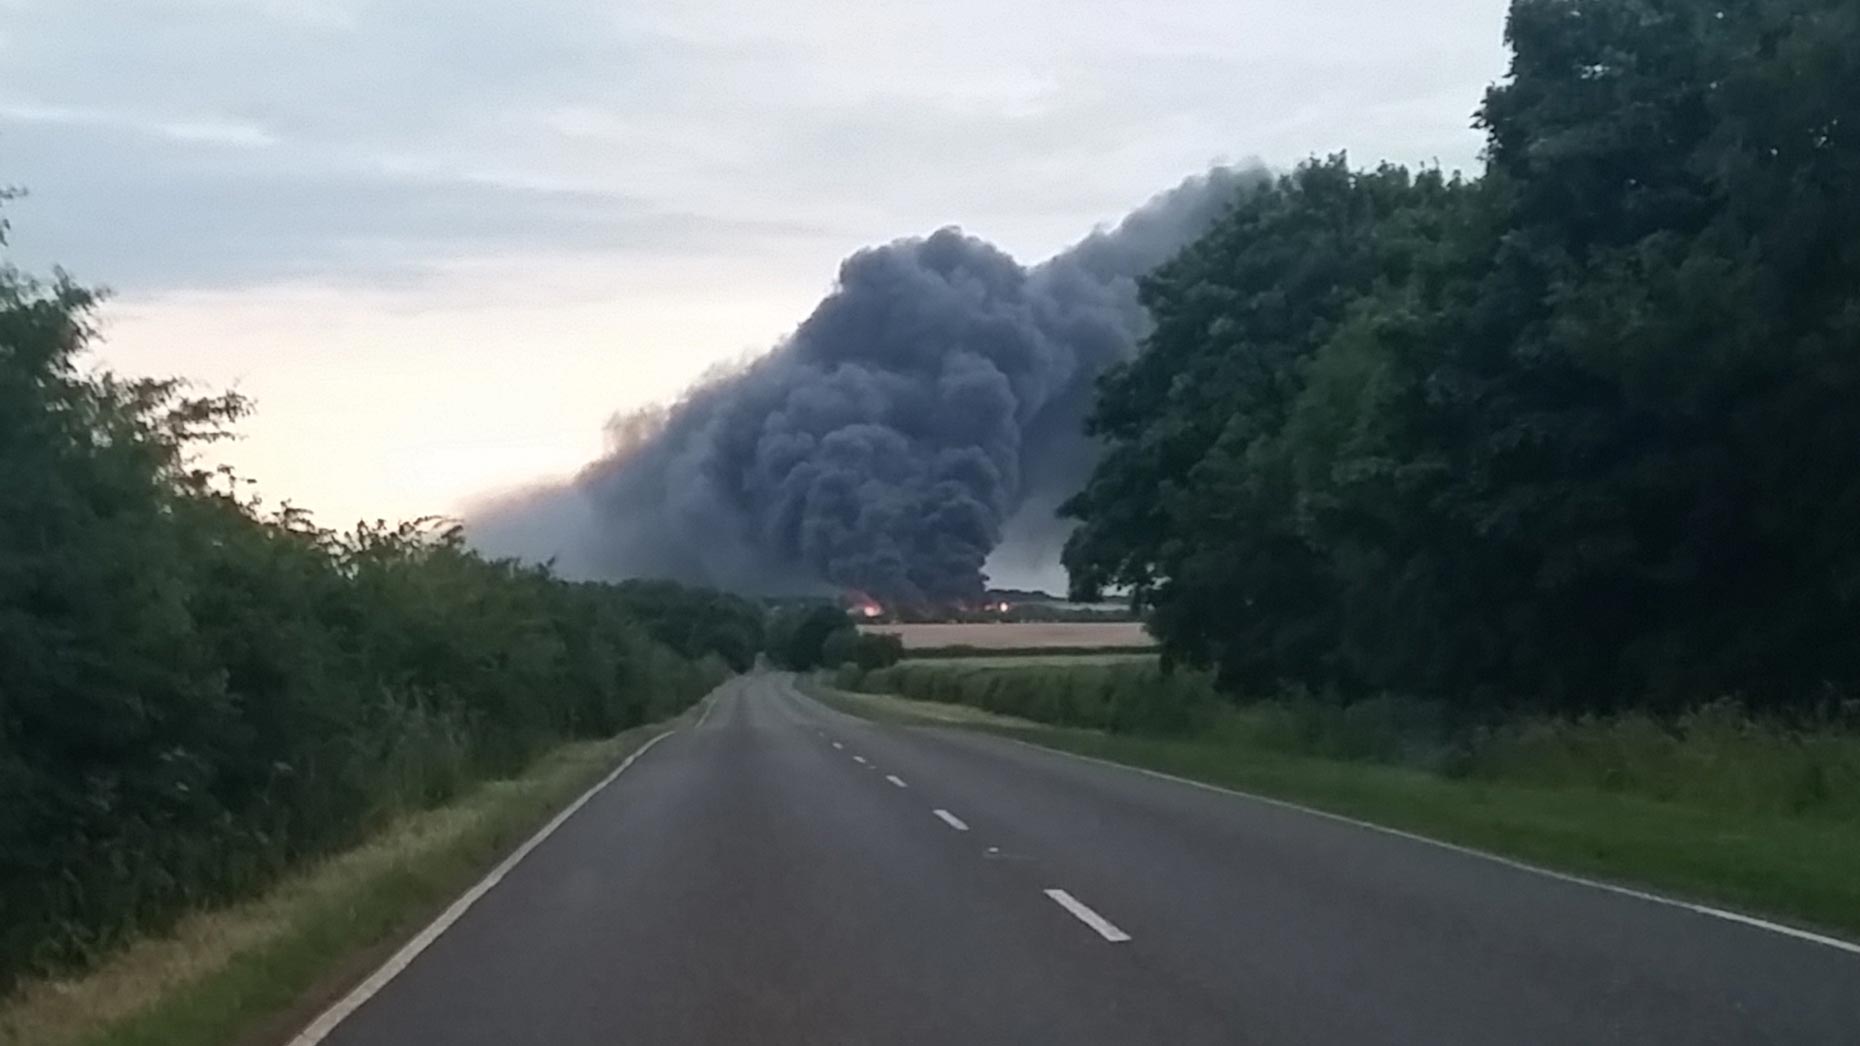 Around 400 bales of waste are on fire at the recycling plant in Ancaster. Photo: Simon Meadows